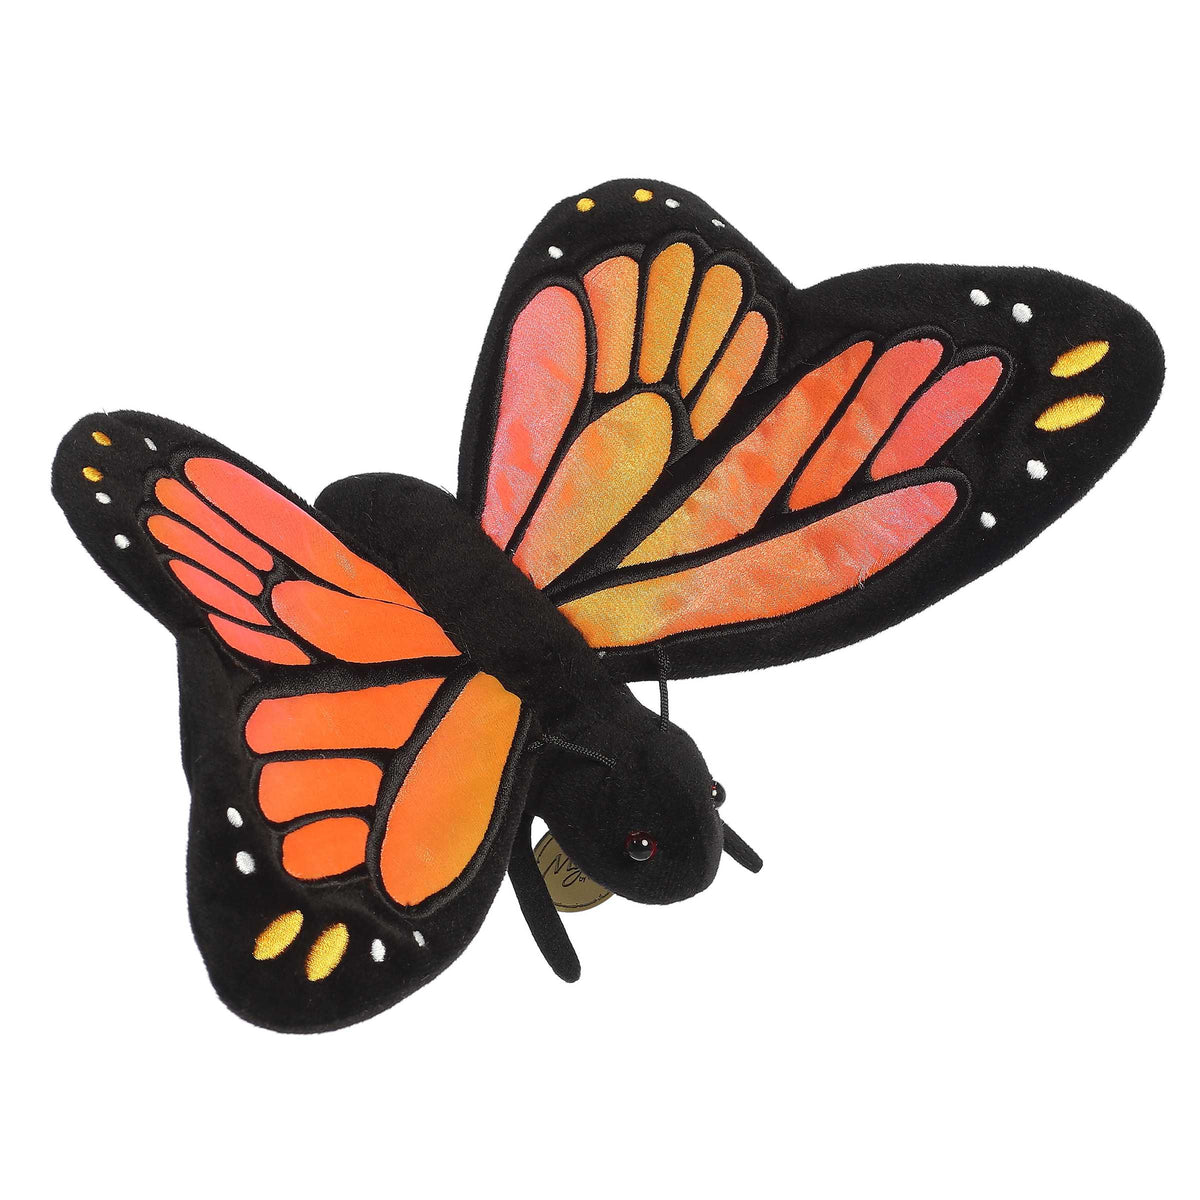 Vibrant orange, black, and white Monarch Butterfly plush with soft, velvety fabric, crafted for authenticity, by Aurora.